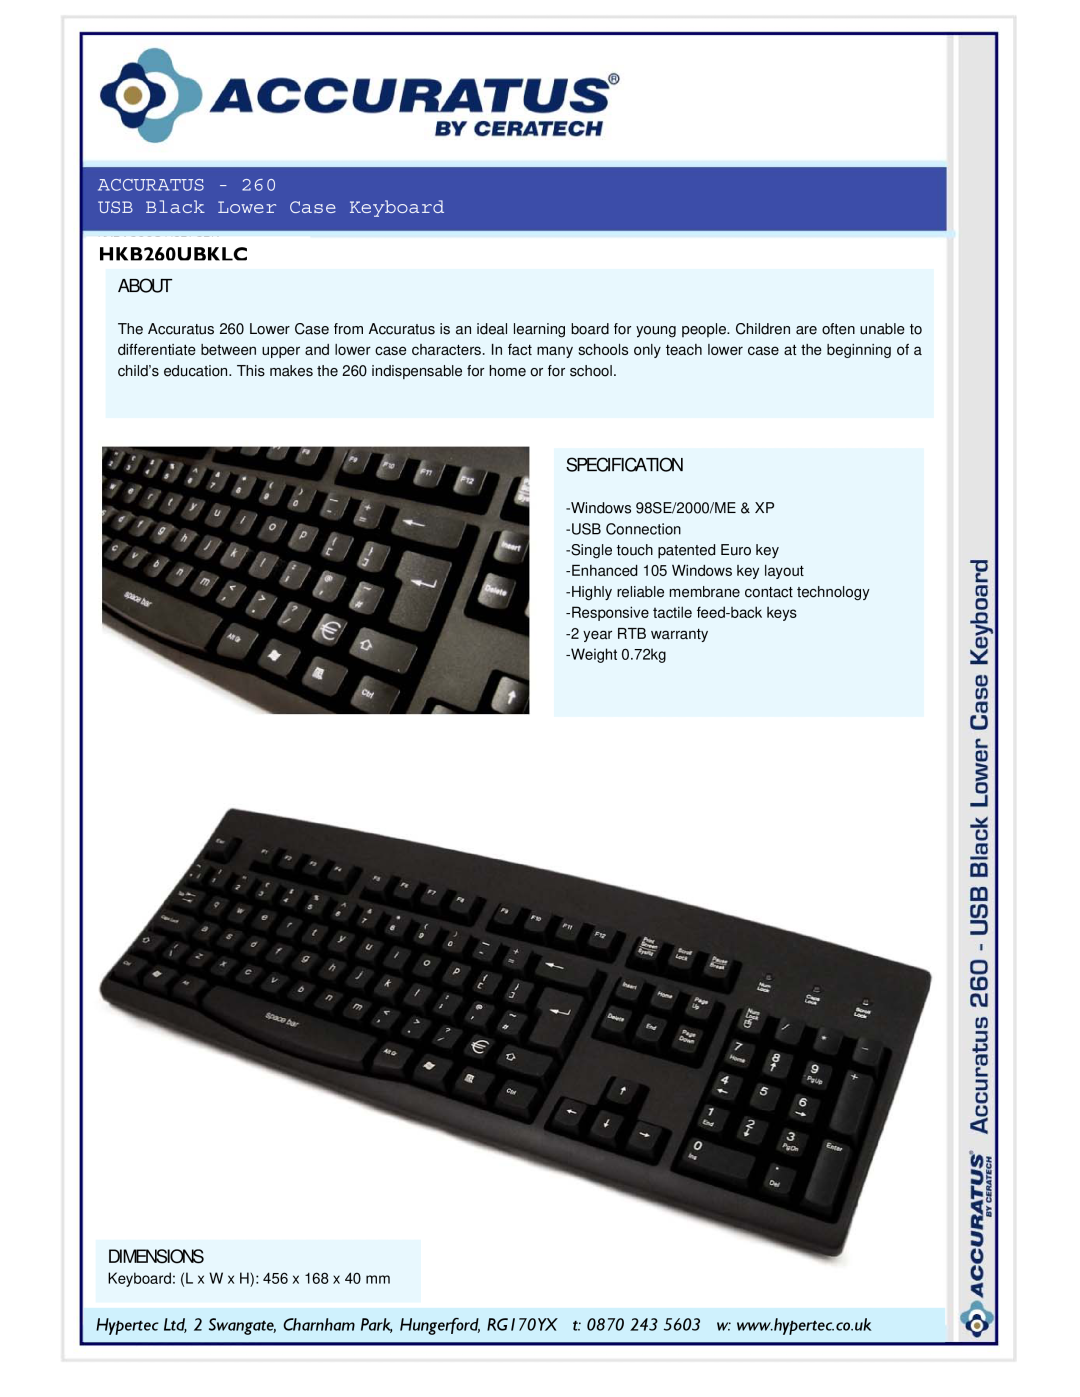 Hypertec HKB260UBKLC dimensions ACCURATUS USB Black Lower Case Keyboard, About, Specification, Dimensions 